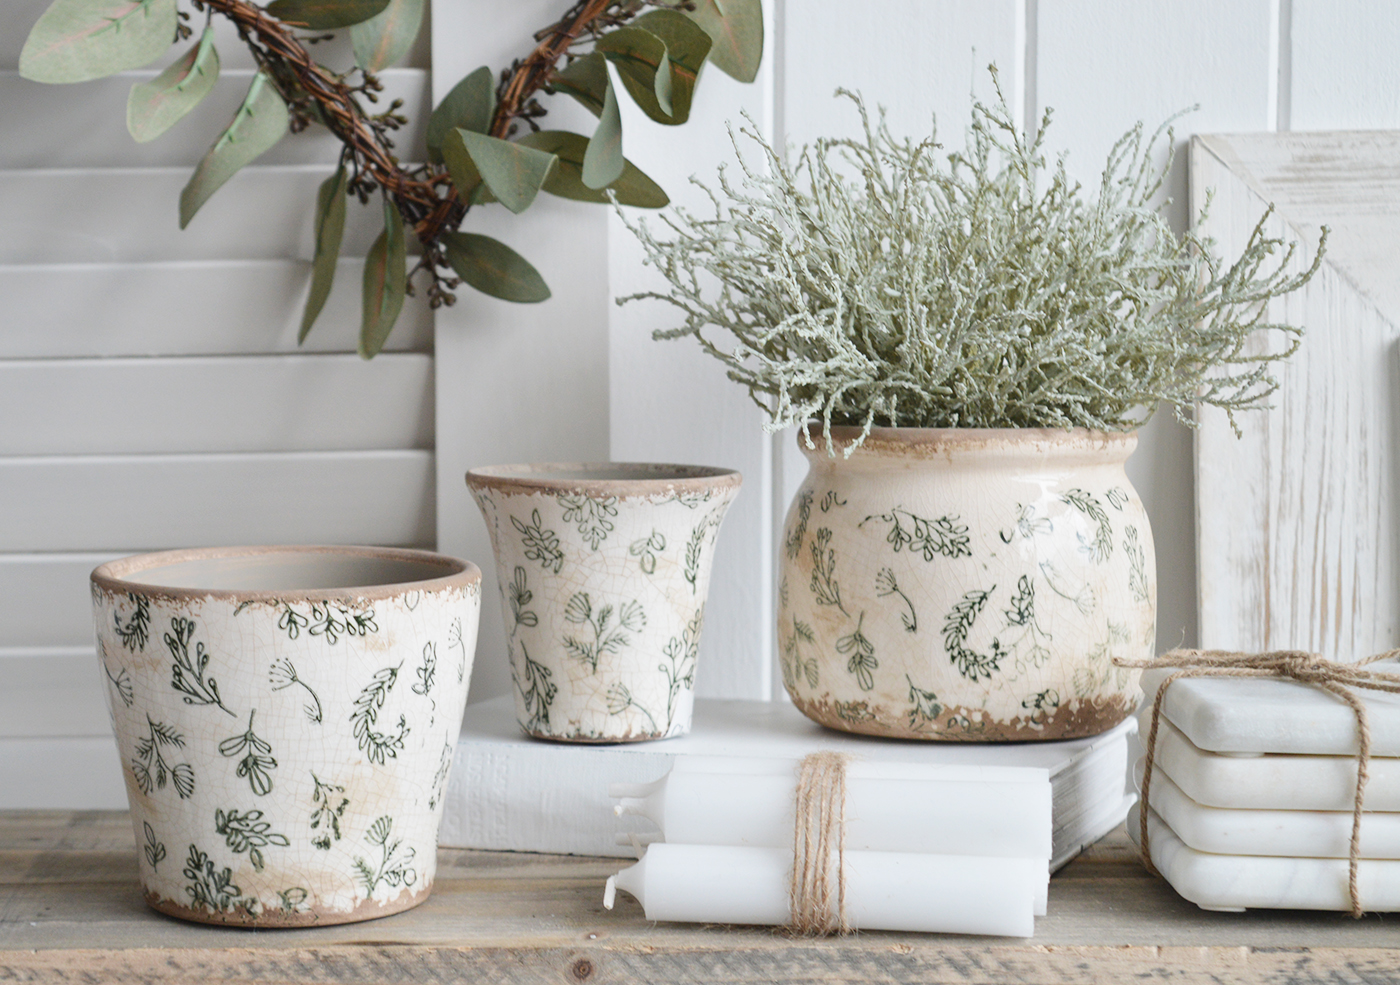 Westbrook vintage style ceramics to suit New England interiors complementing modern farmhouse, country and coastal furniture